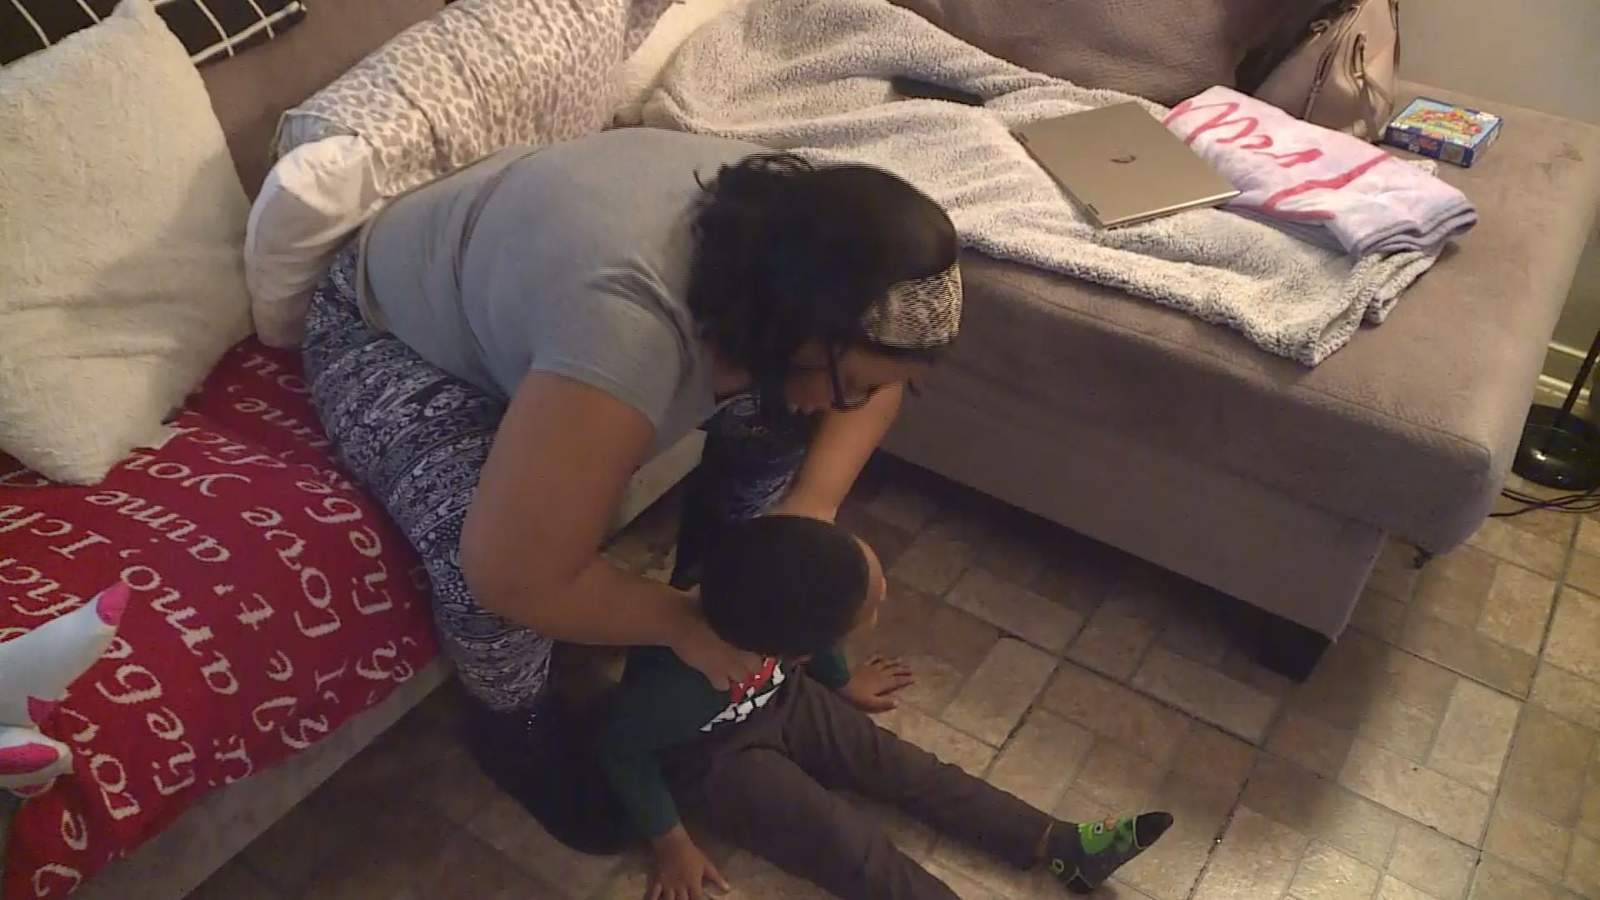 Mother claims her autistic son was abused at Jefferson Elementary School